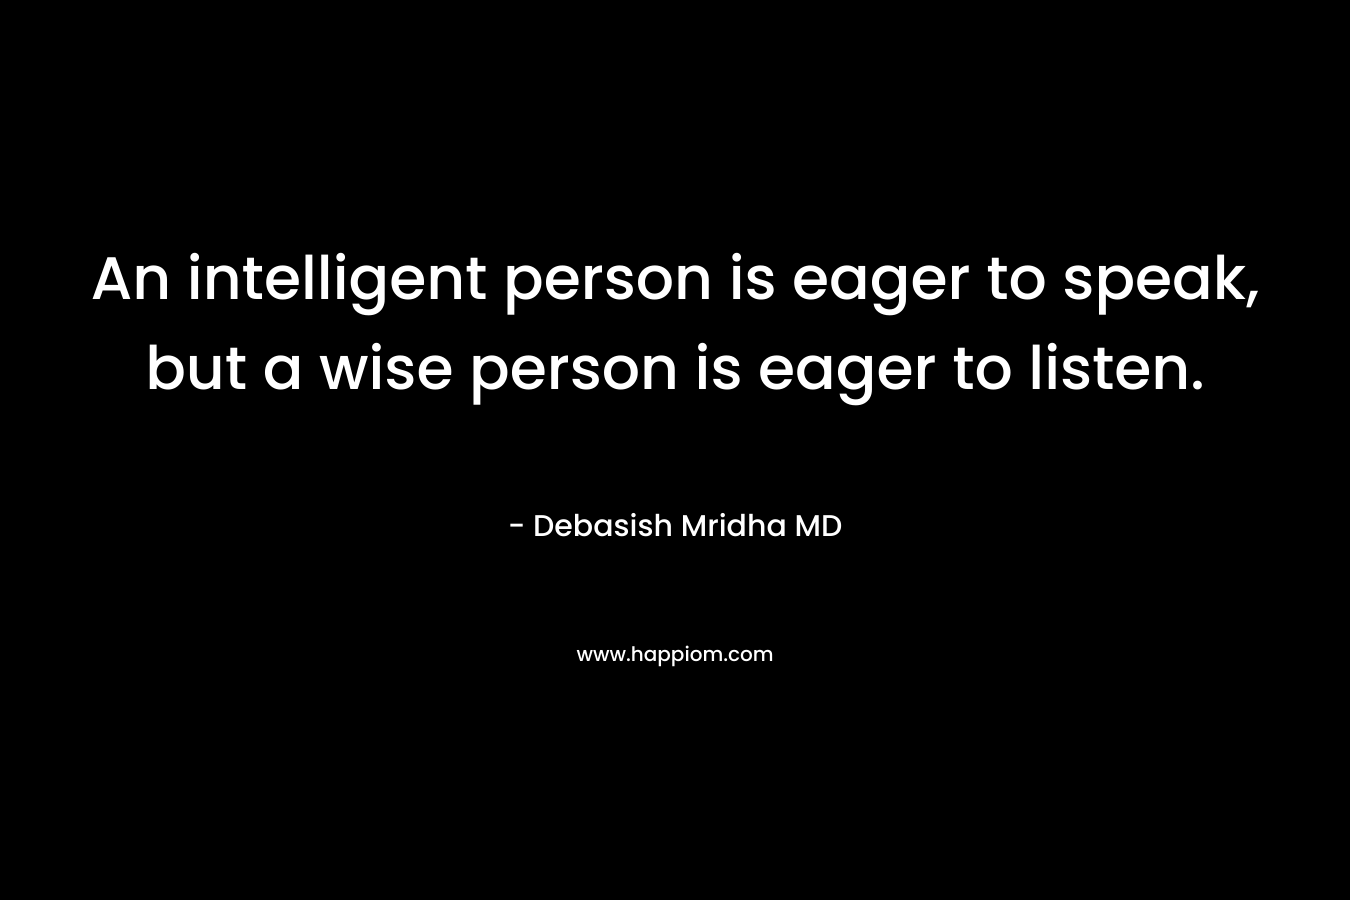 An intelligent person is eager to speak, but a wise person is eager to listen. – Debasish Mridha MD